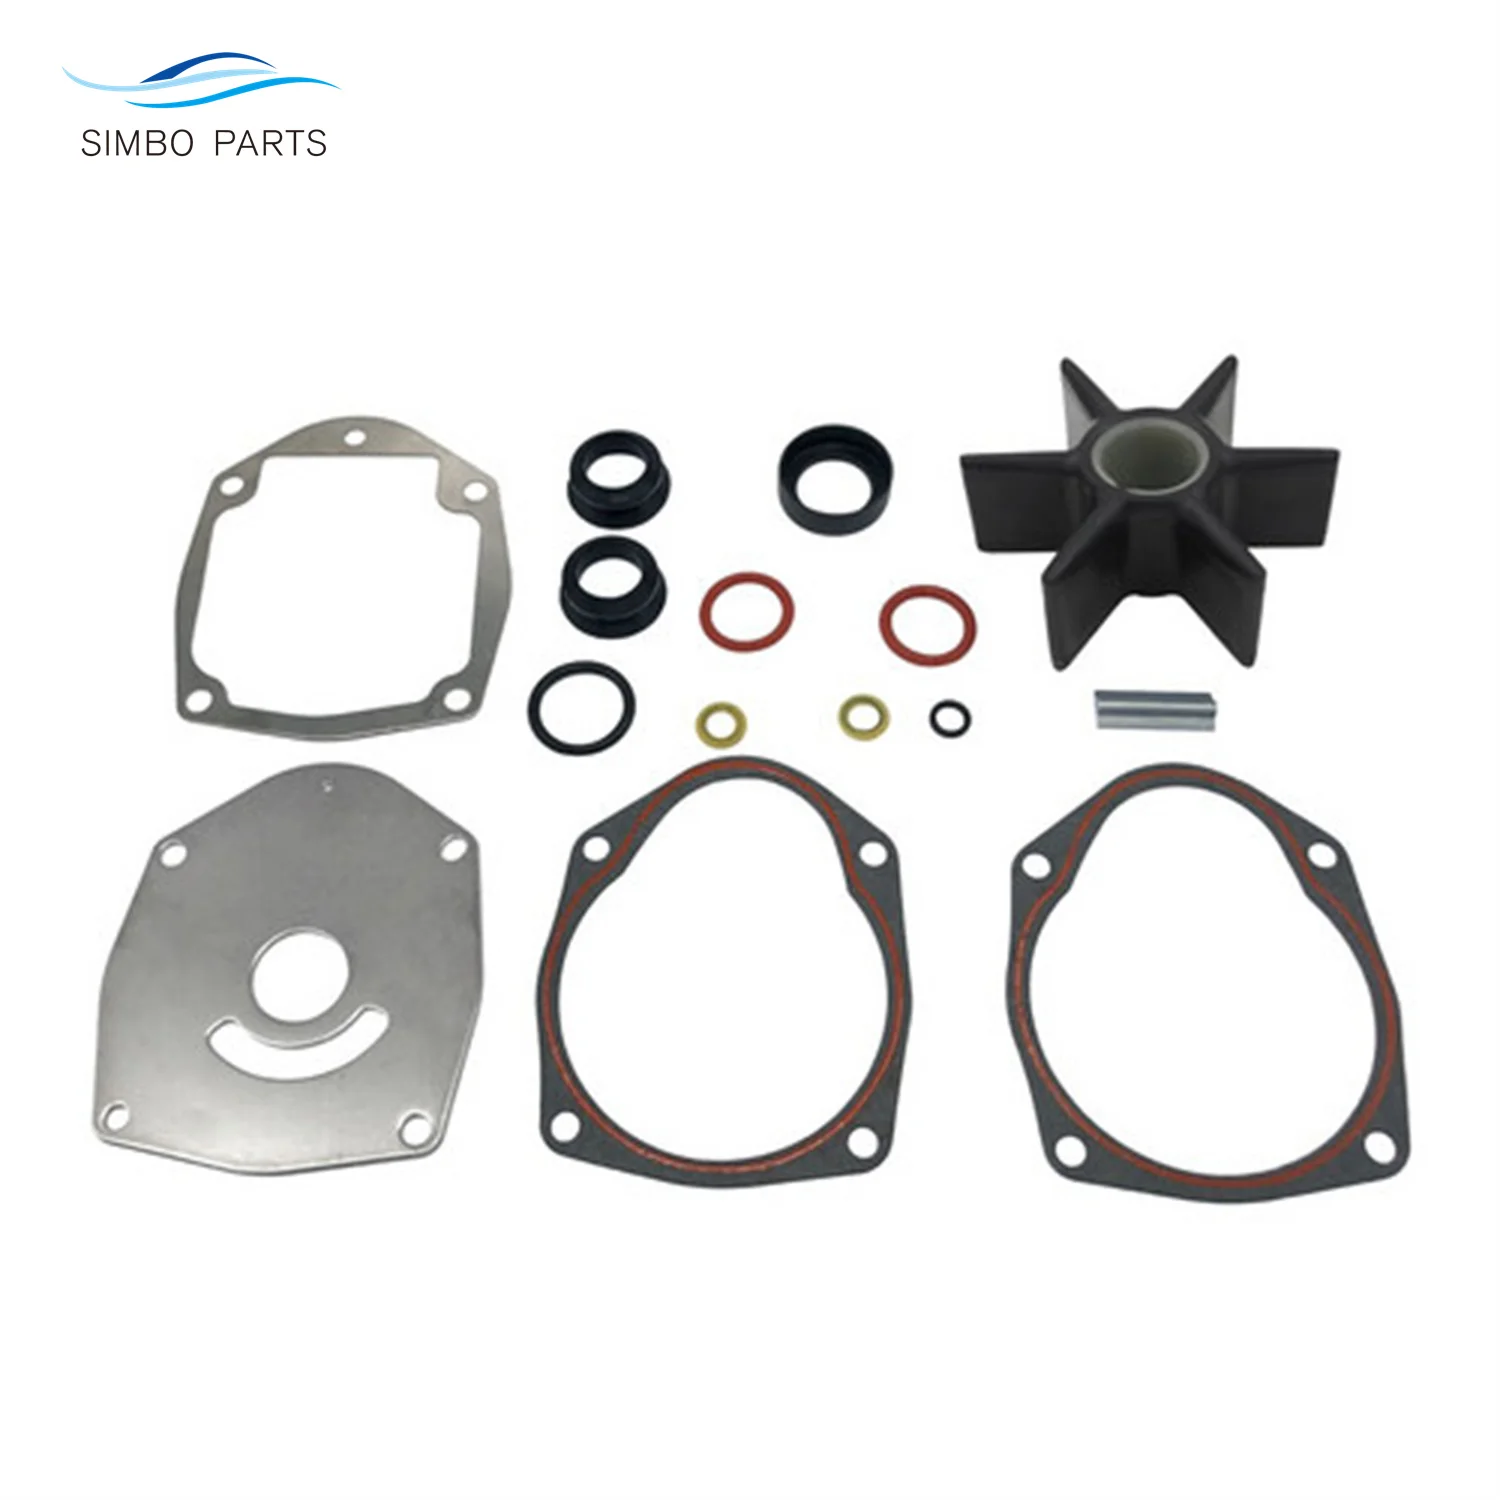 

Water Pump Impeller Kit For Mercury 4-Stroke 40-100 HP Outboard Motor 43026Q06 8M0100526 43026Q5 43026T6 43026T11 43026T7